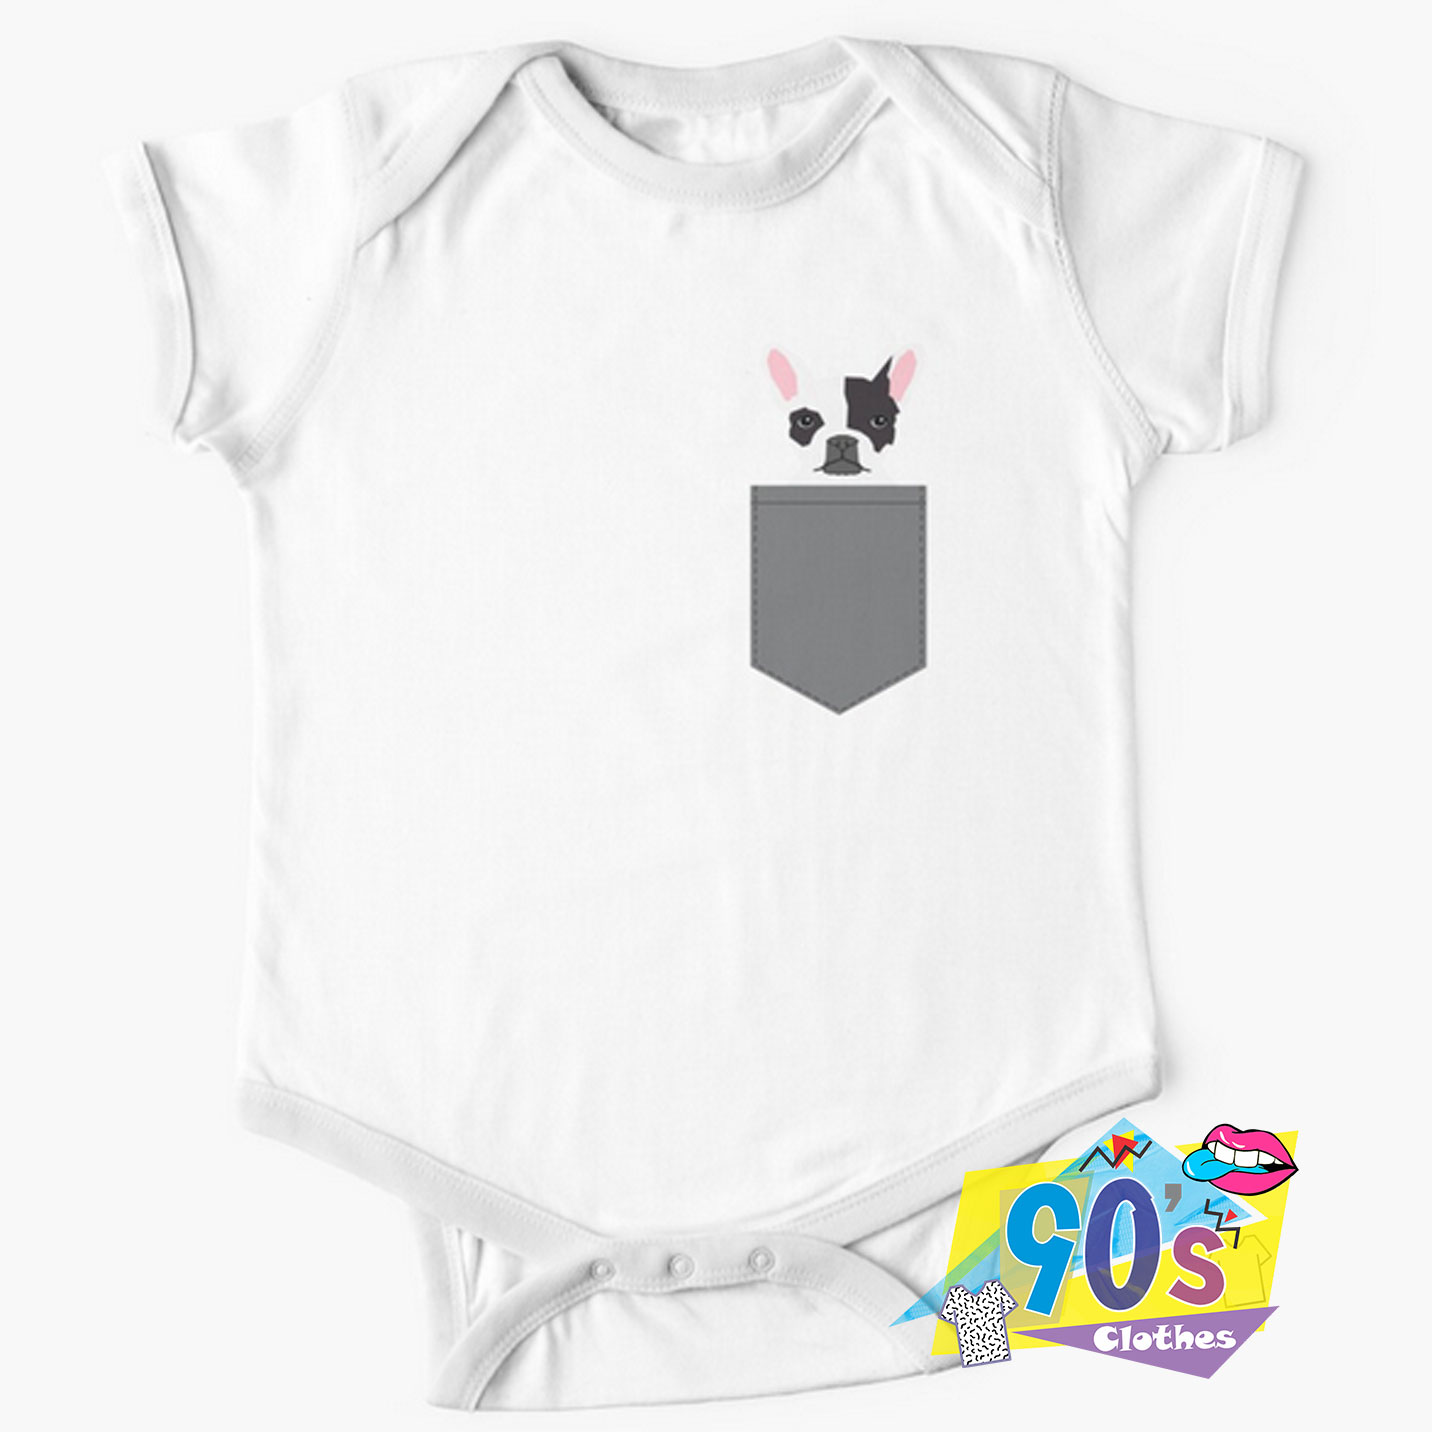 French Bulldog Animal Baby Onesie On Sale 90sclothes Com